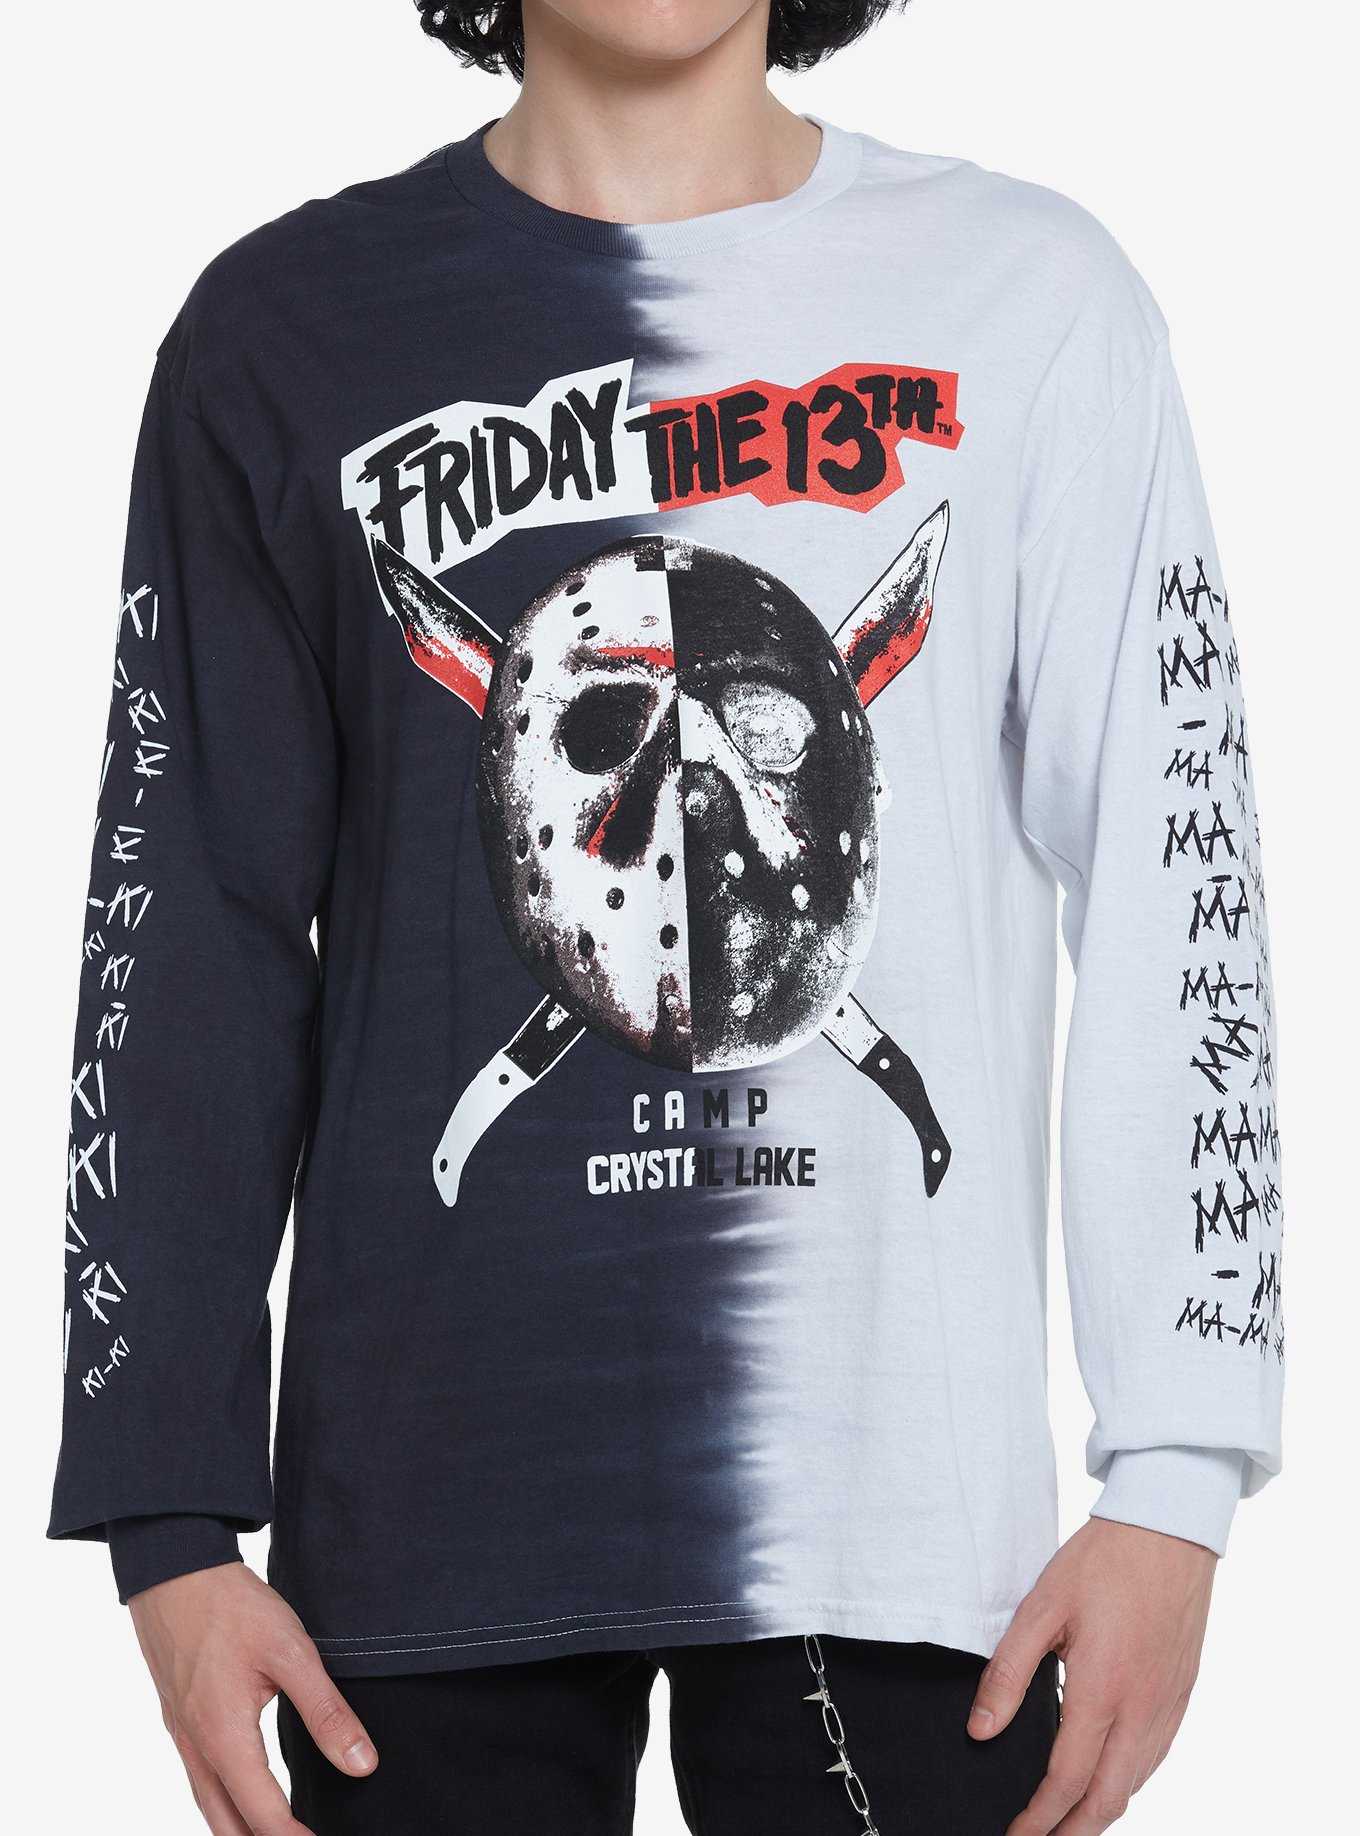 Friday The 13th Voorhees Jersey - Juniors All Over Print T-Shirt – Sons of  Gotham